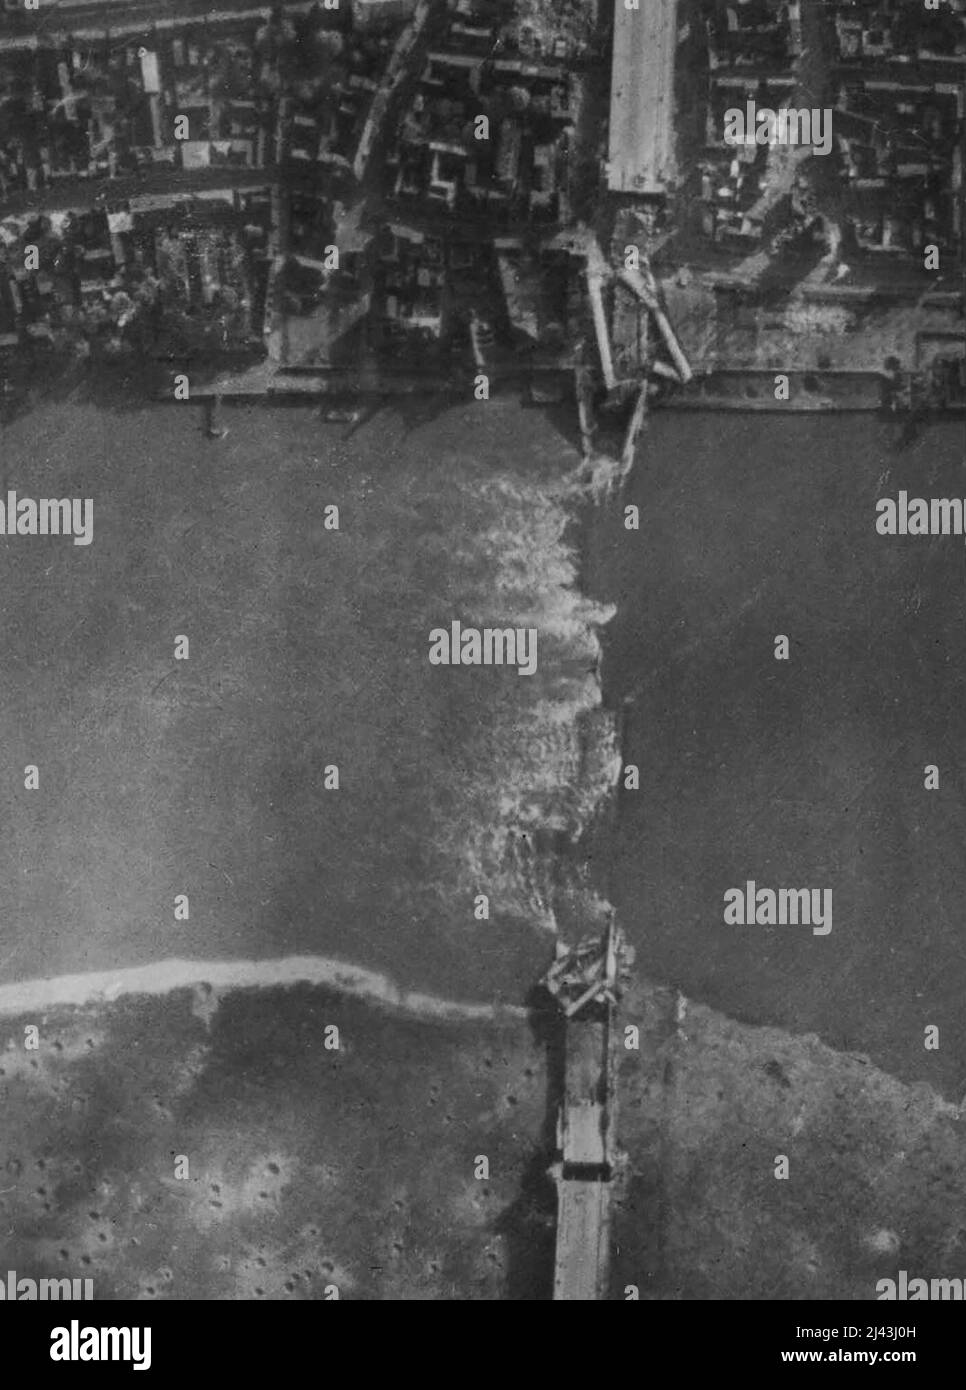 R.A.F. Attack On Cologne Of 28/10/44. Another RAF. reconnaissance picture taken after the attack of 28/10/44. Shows the large highway suspension bridge which was completely demolished. Cologne, worst damaged city in the whole of the Ruhr and Rhineland, was given its heaviest attack of the whole war by RAF. Bomber Command in the daylight attack of 28/10/44. Lancasters and Halifaxes dropped a great weight of high explosives and incendiary bombs on the railway and industrial city. The bombers were Stock Photo